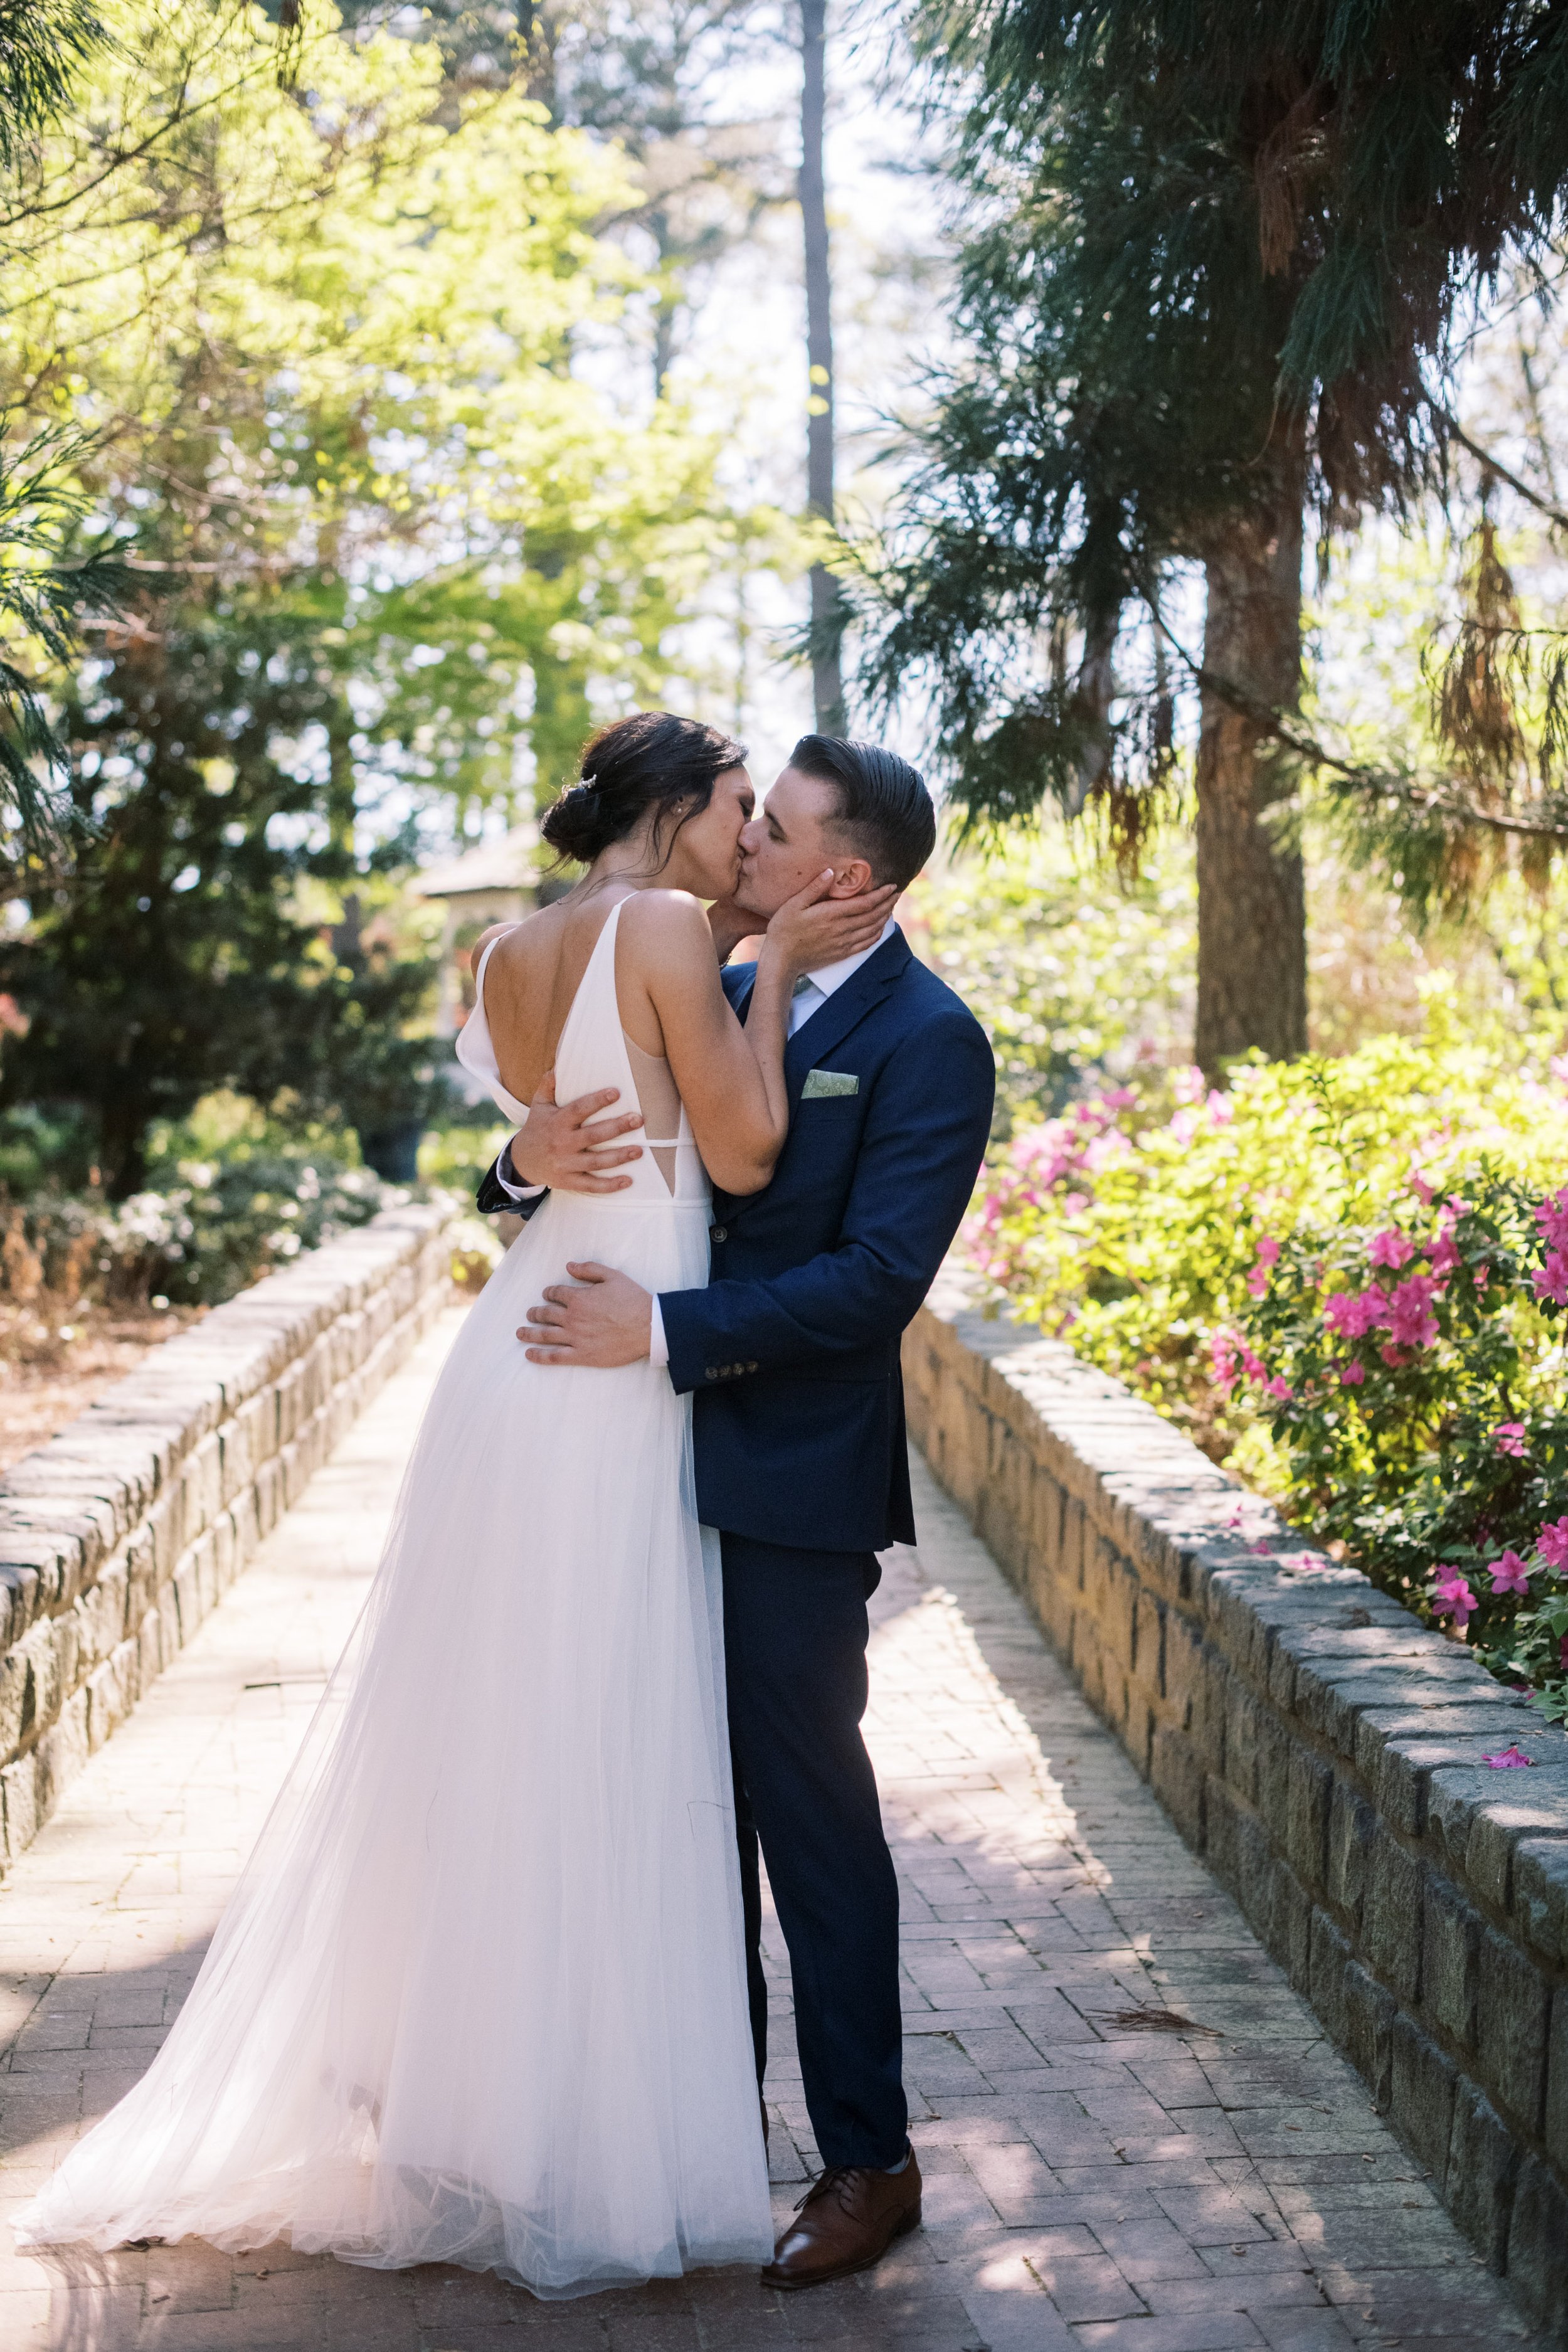 Bride and Groom Kiss in Pathway Cape Fear Botanical Garden Wedding